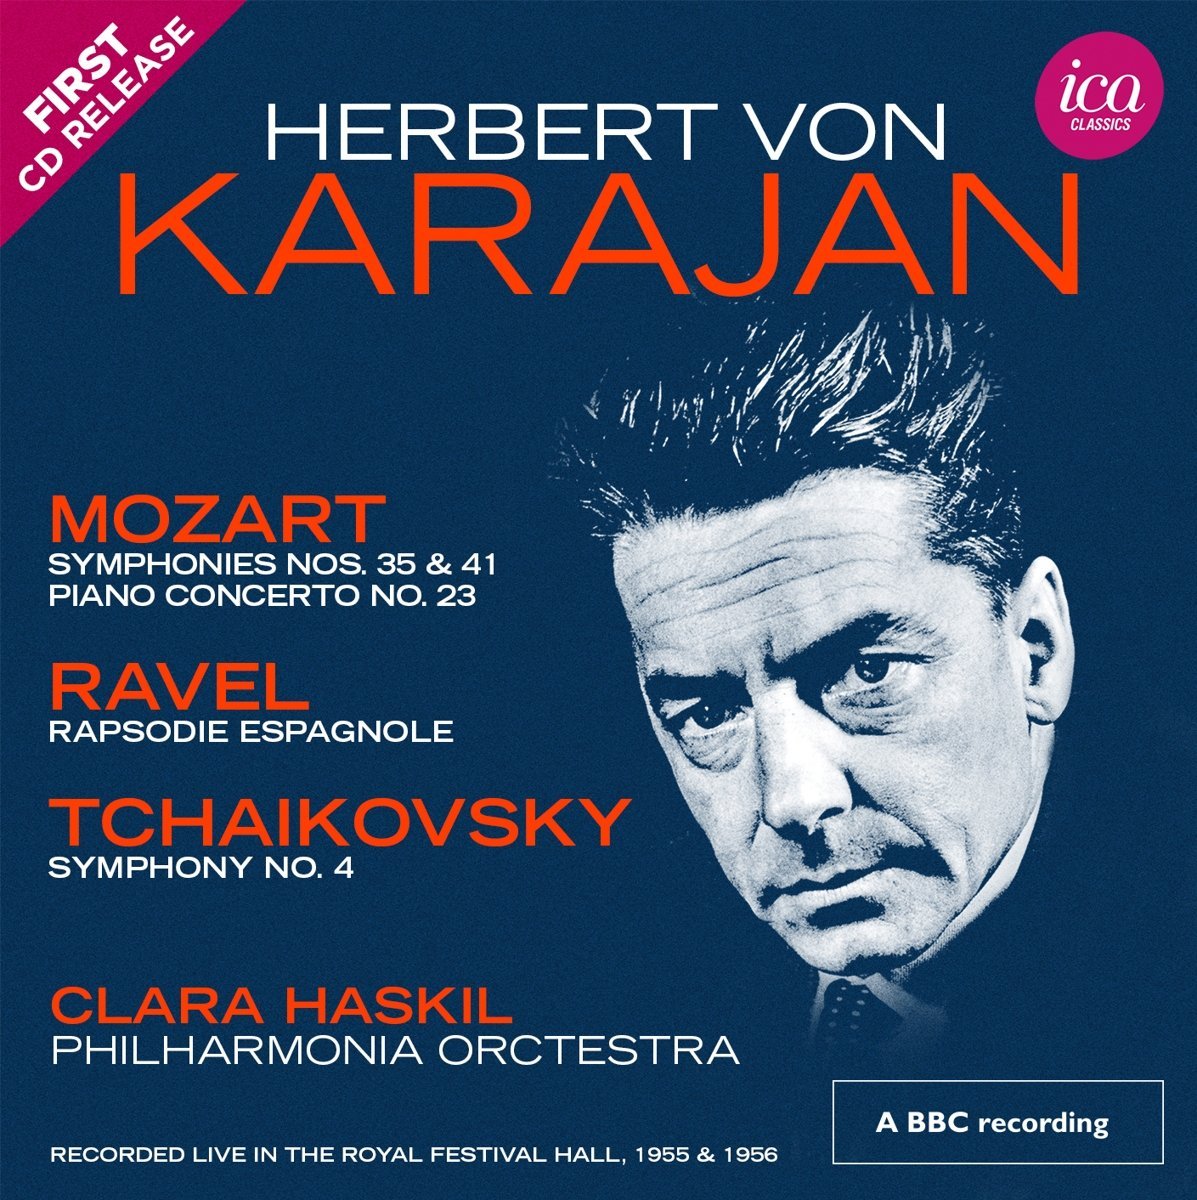 Karajan conducts the Philharmonia in Mozart and Tc